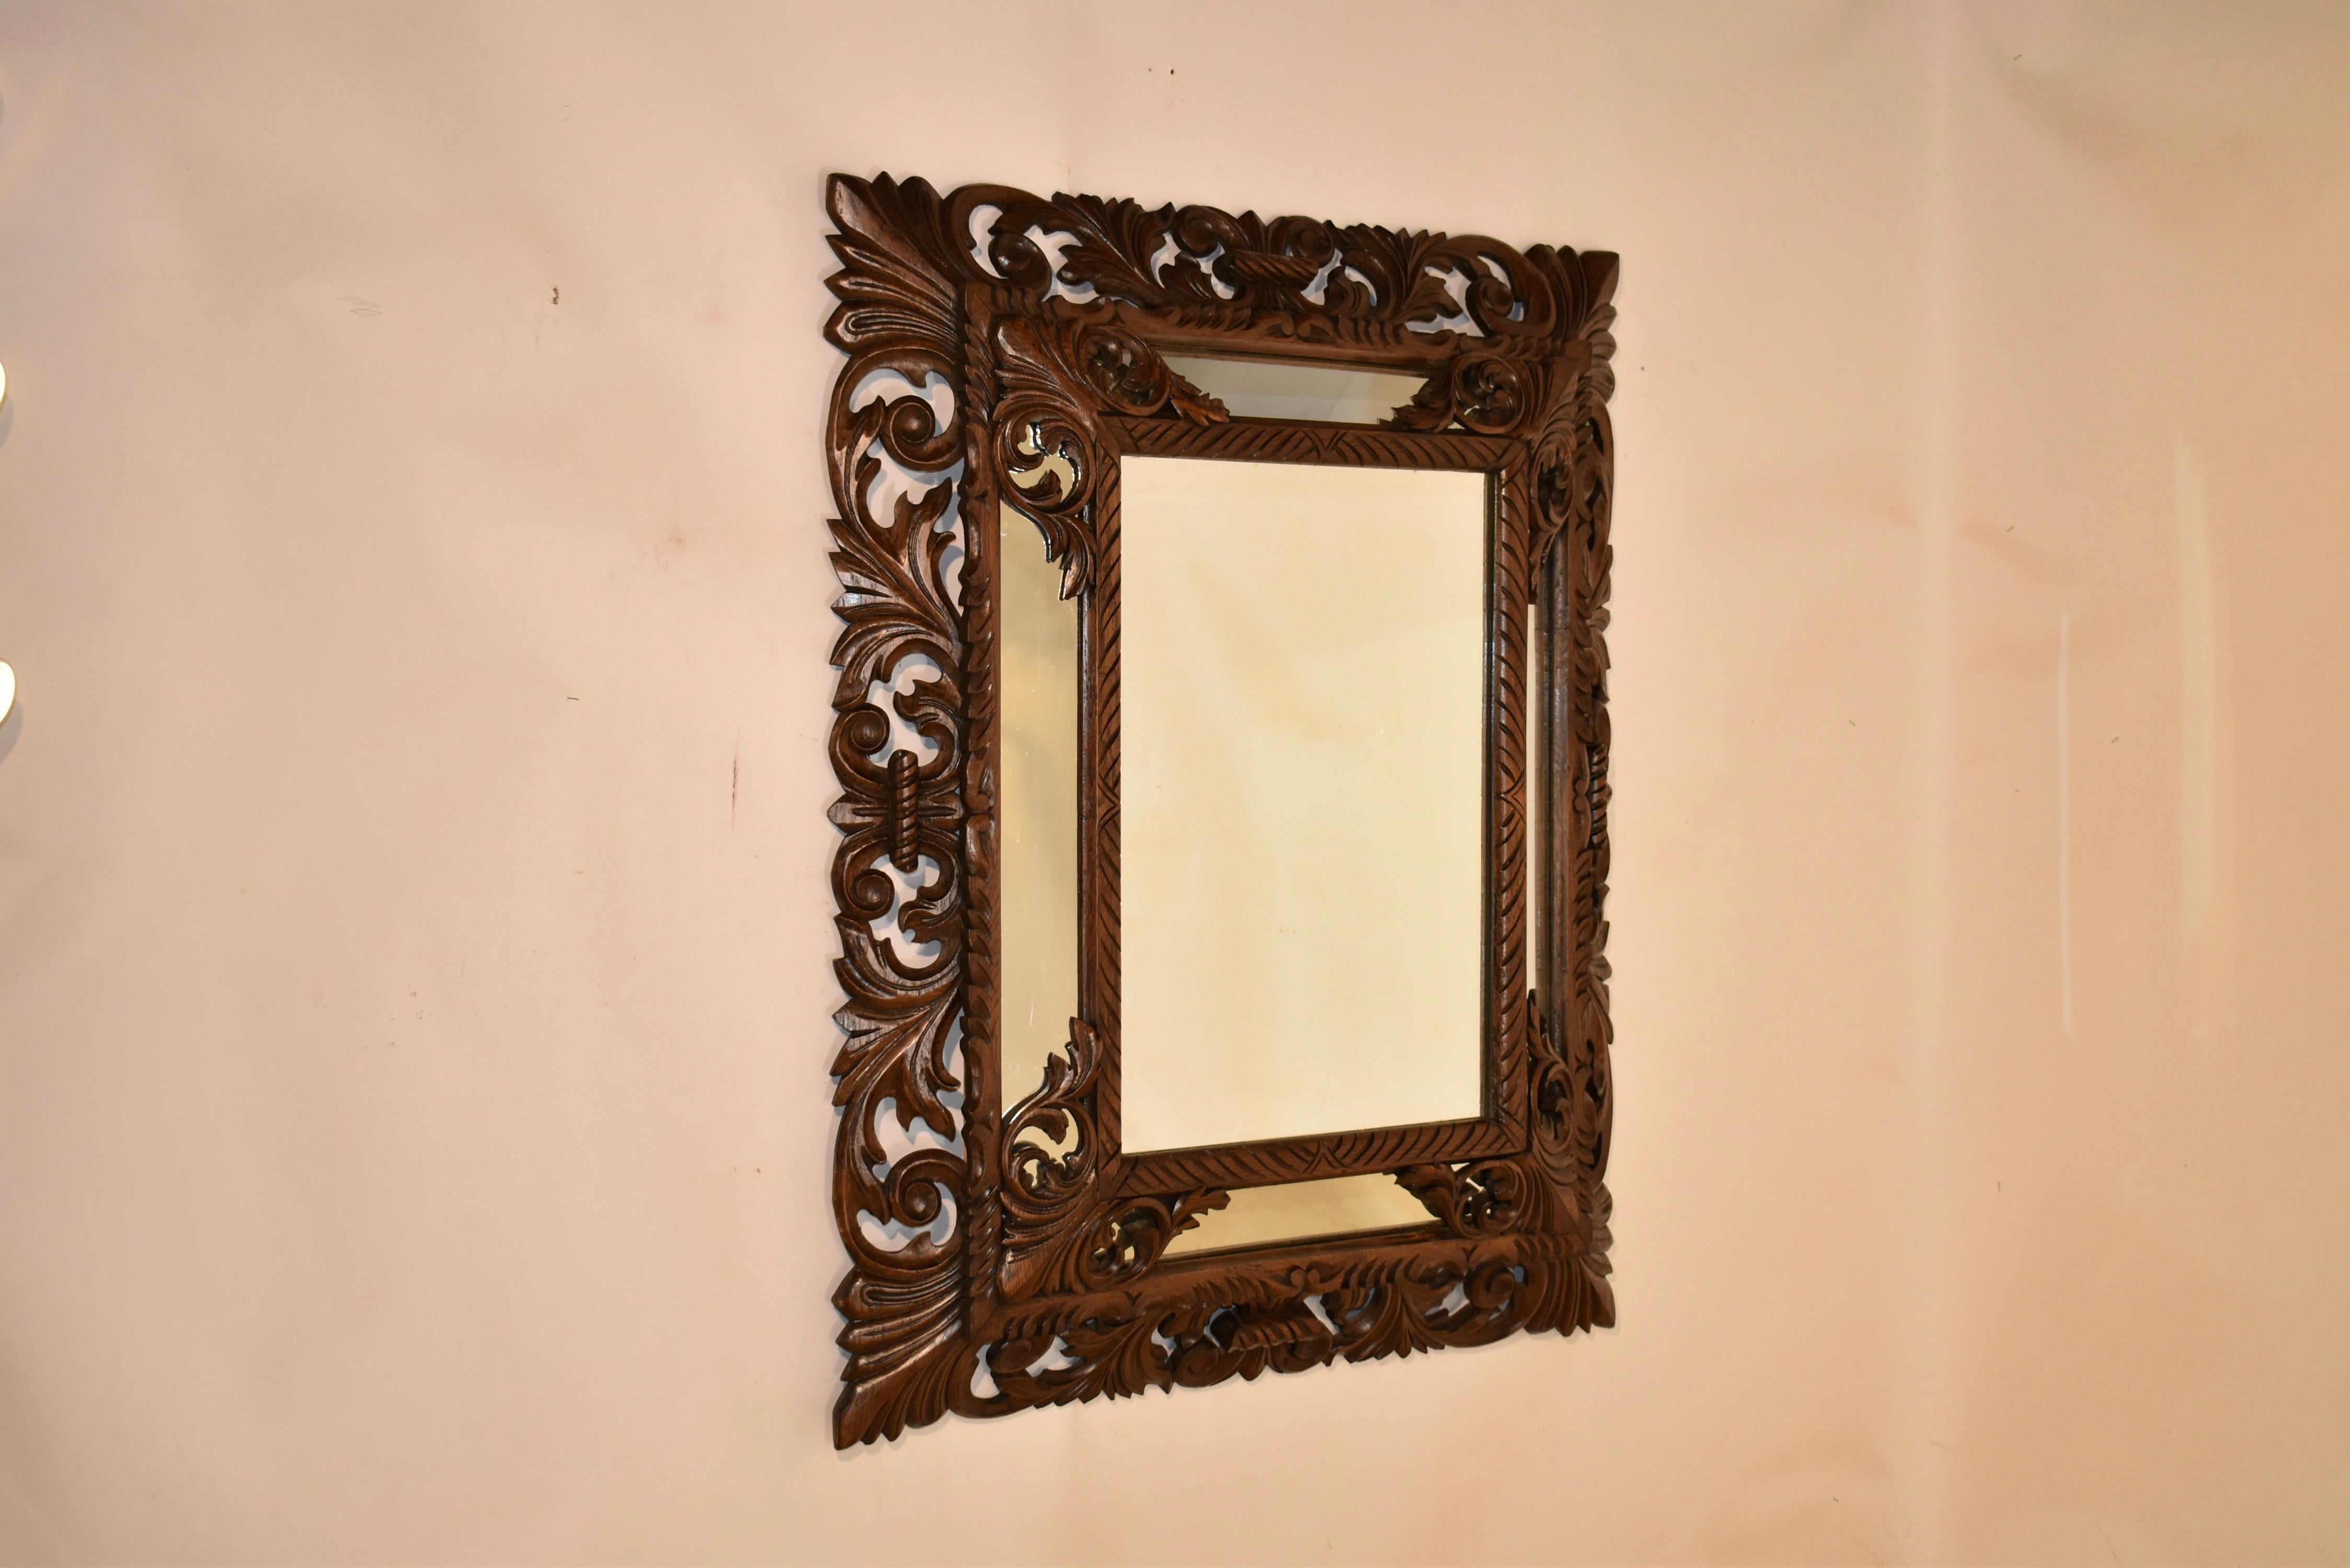 19th century wonderfully hand carved cushion mirror which came out of the grand house Locksley Hall in Staffordshire.  The outer frame is hand carved and has a glorious pattern of leaves and scrolls.  The inner frame is also hand carved with joining